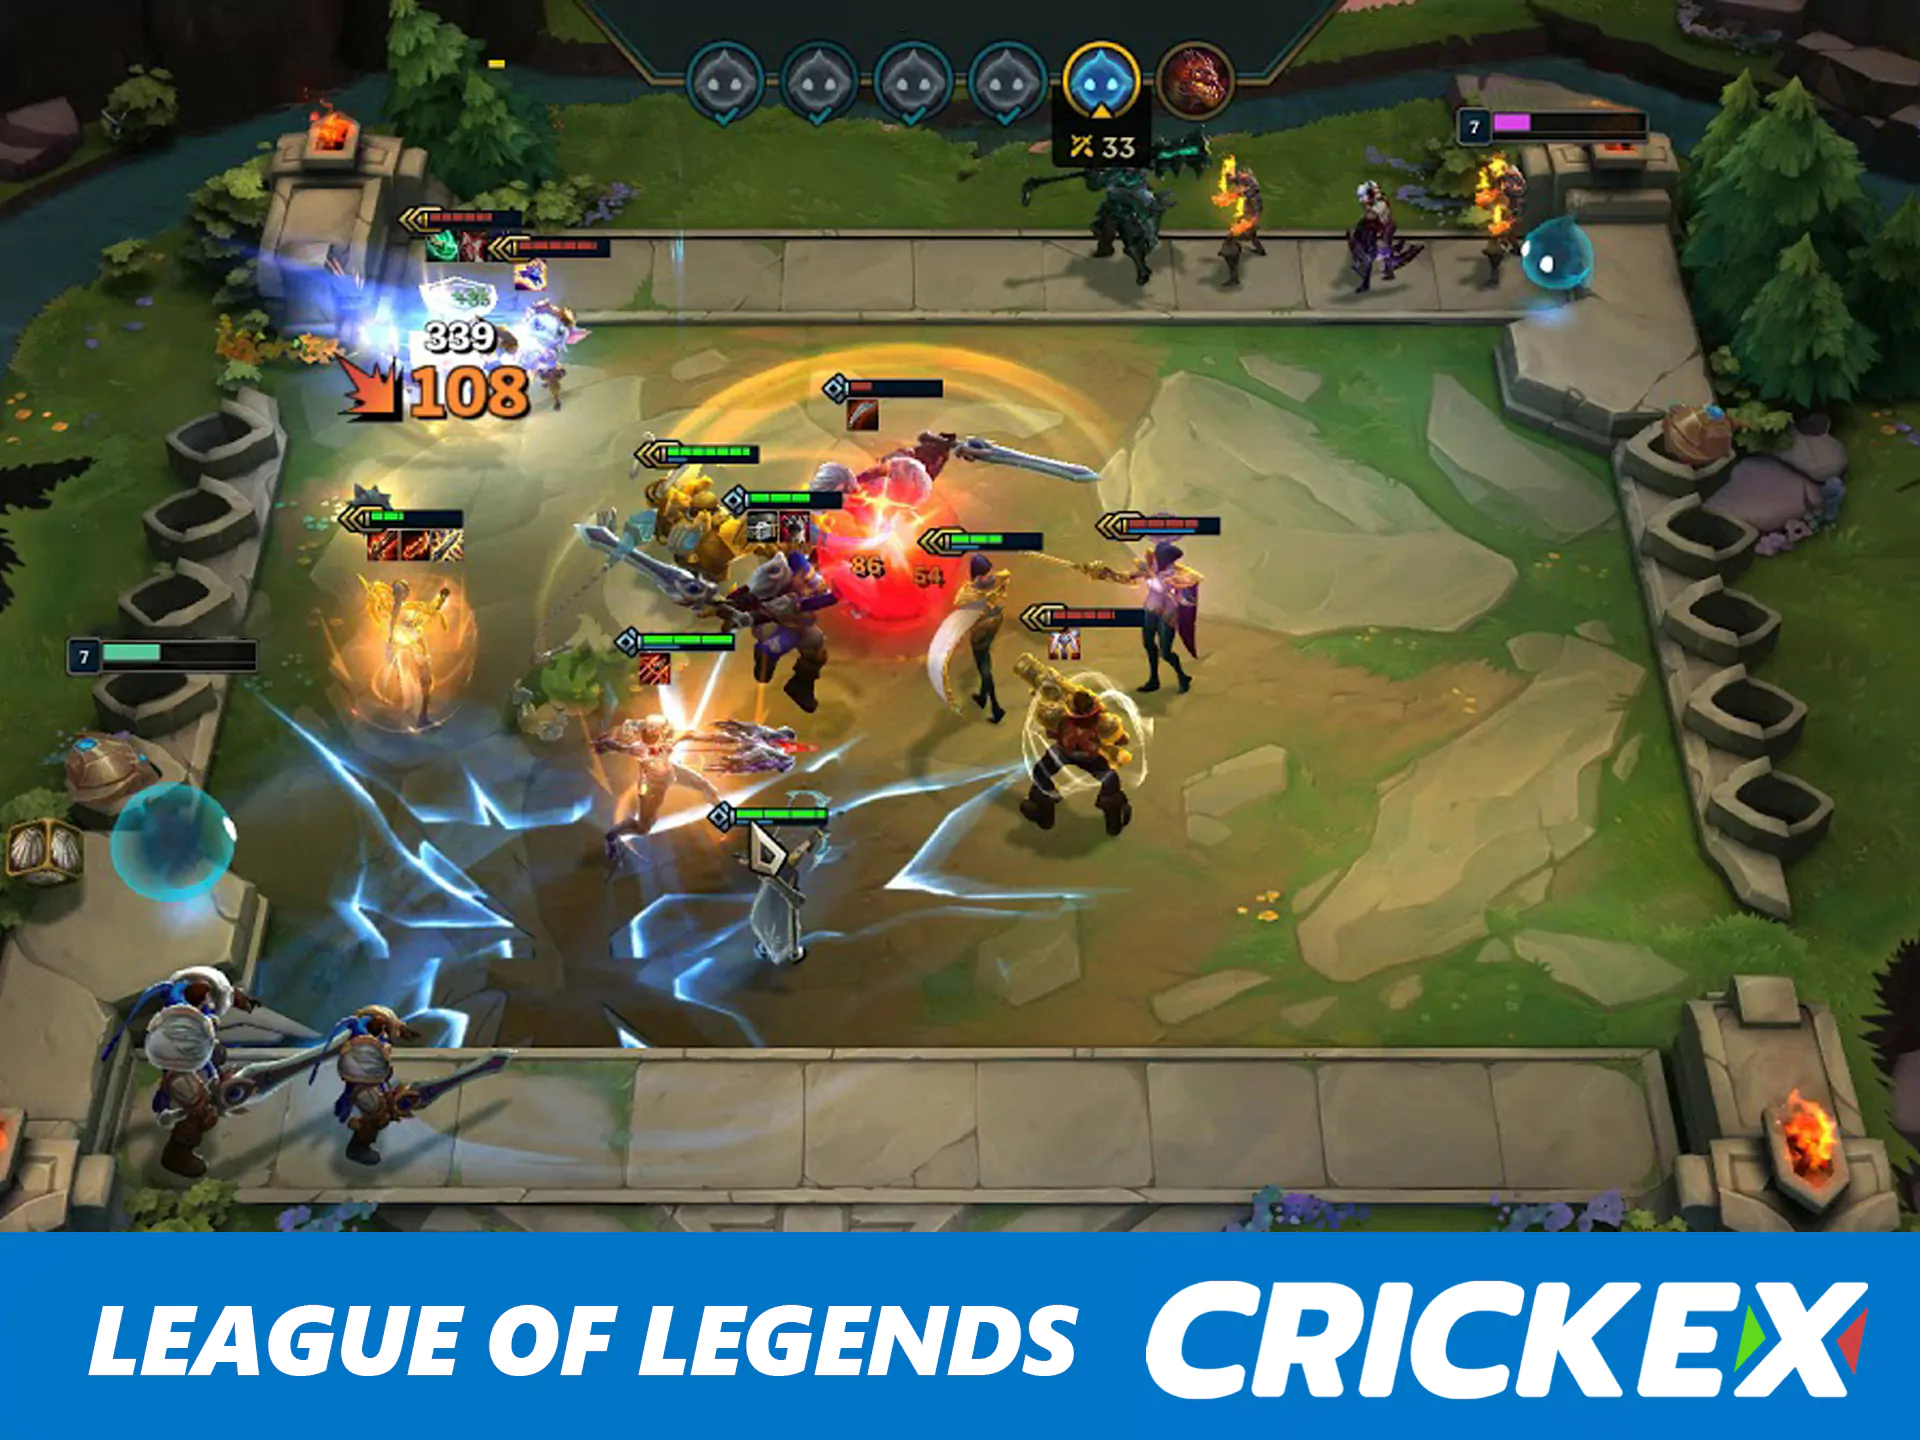 Crickex offers betting on LoL in India.